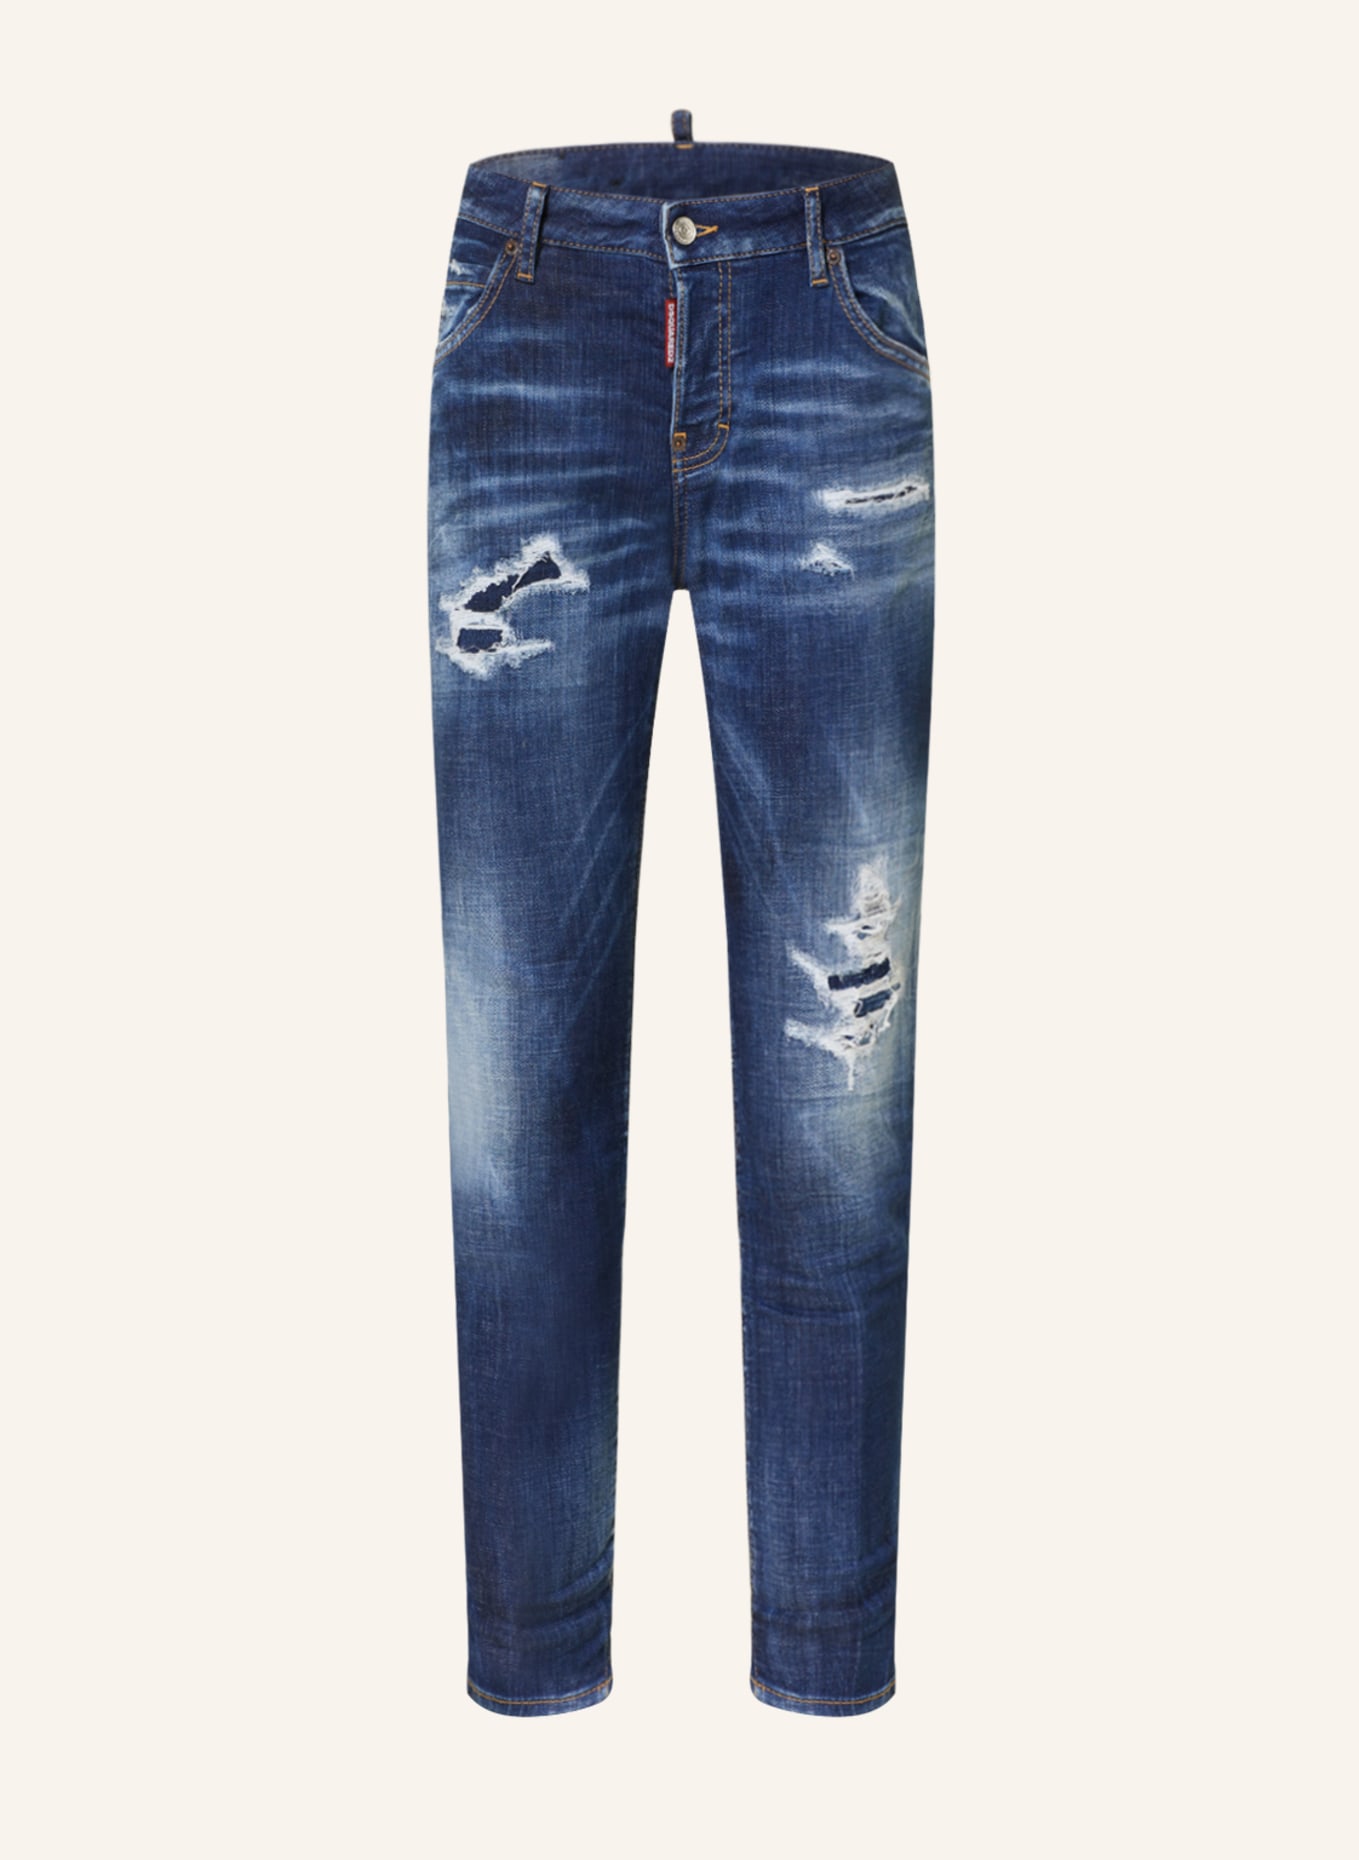 DSQUARED2 7/8-Jeans COOL GIRL, Farbe: 470 NAVY BLUE (Bild 1)